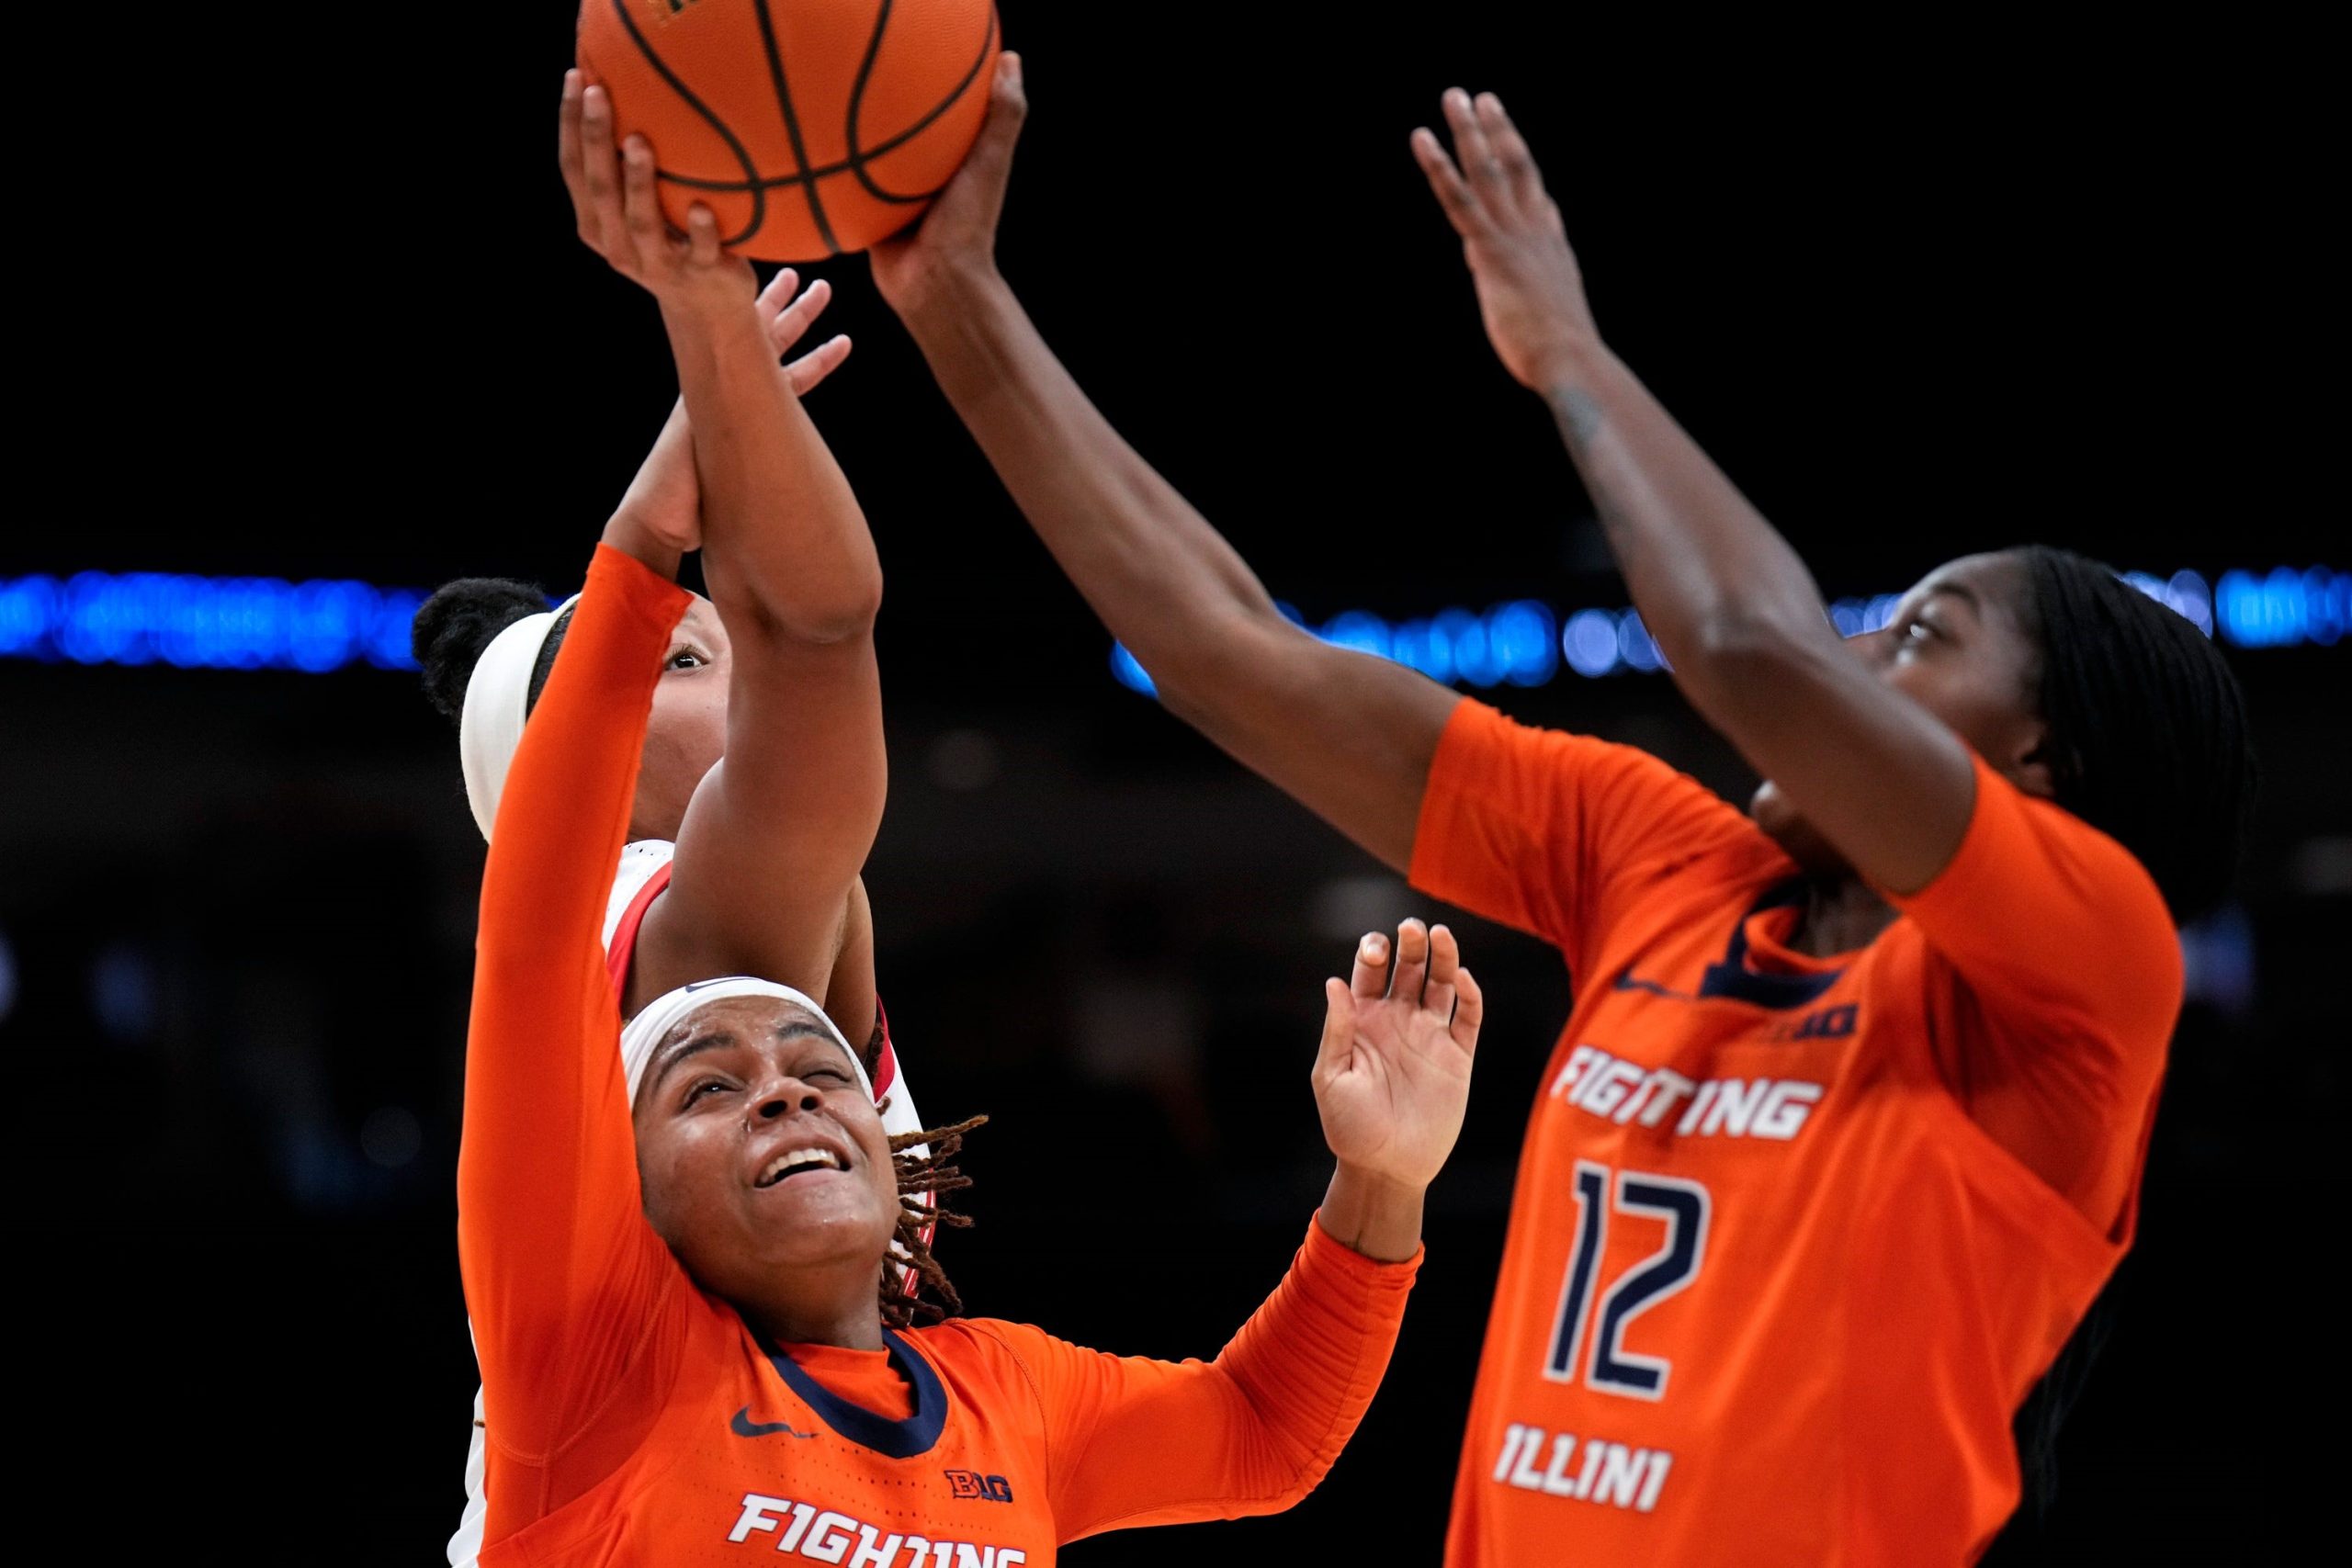 Illini Can’t Pull Off Top Five Upset in Columbus: No. 3 Buckeyes Survive 87-81